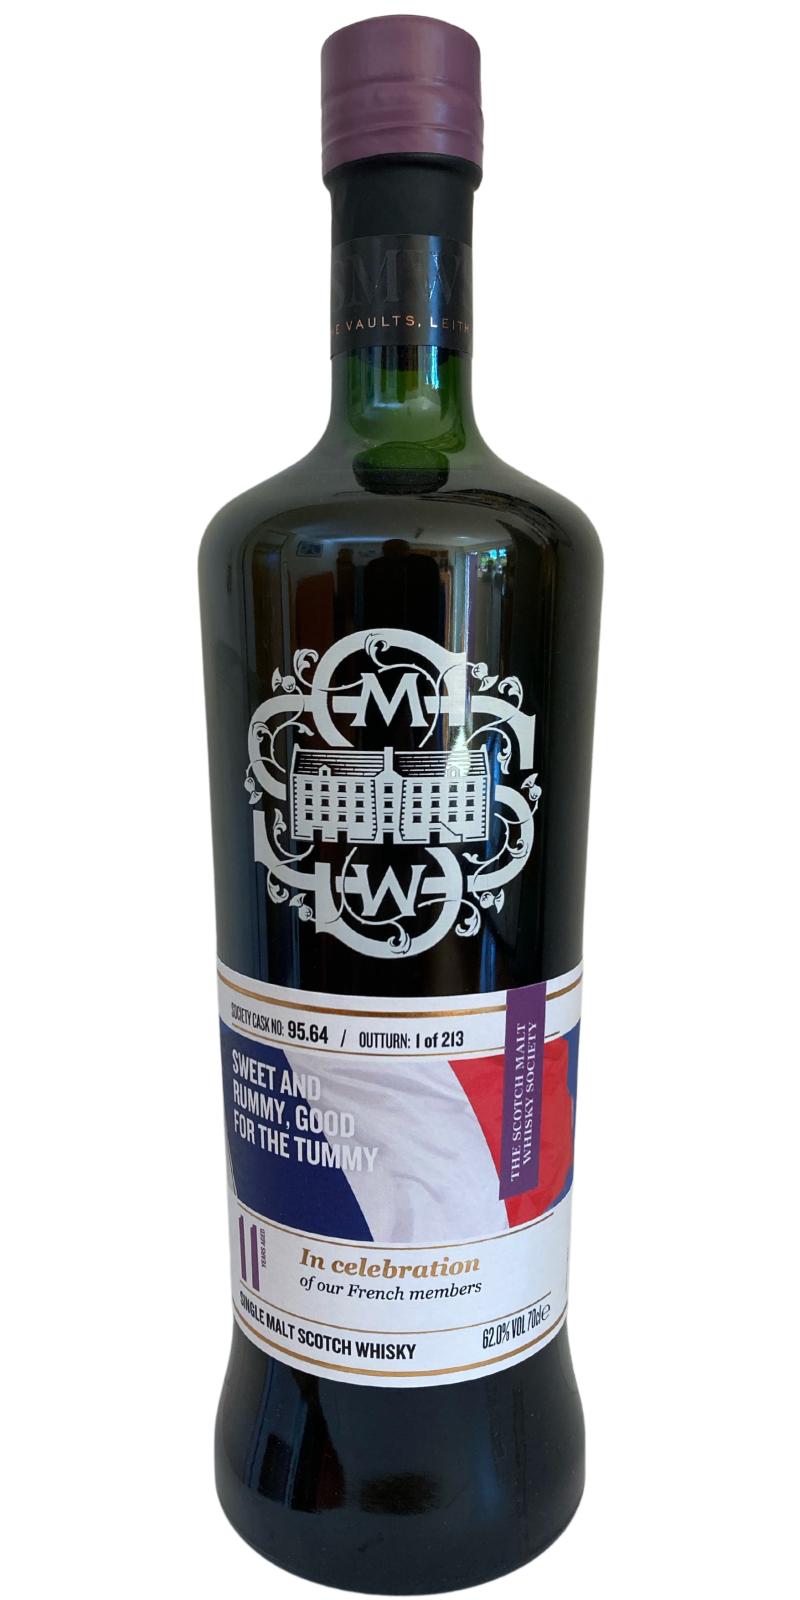 Auchroisk 2010 SMWS 95.64 In celebration for our French members 62% 700ml